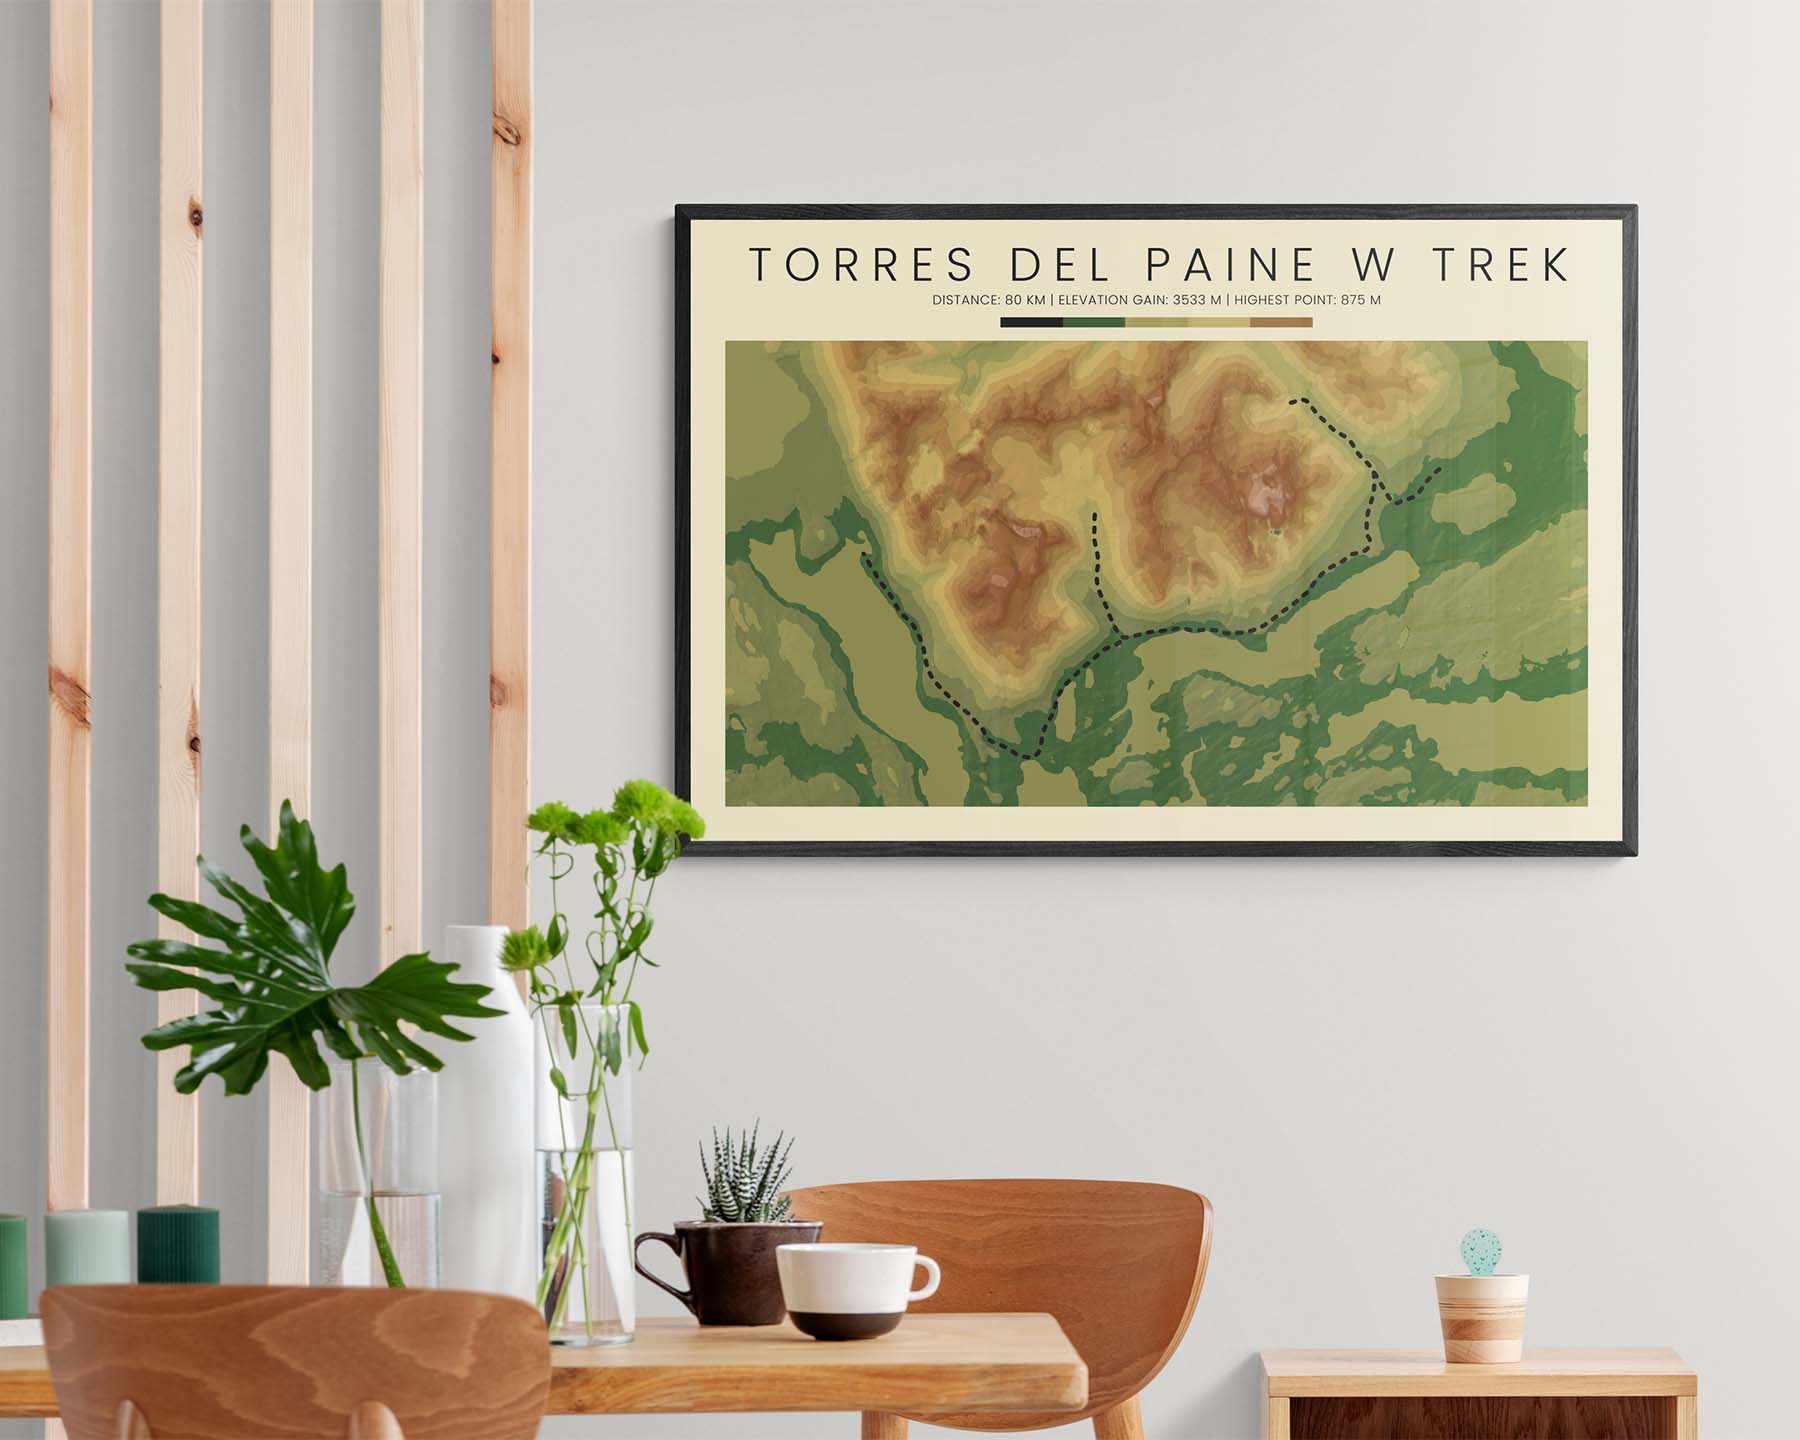 W Trek Patagonia (Andes) Route Art with Topographic Map in Modern Interior Decor